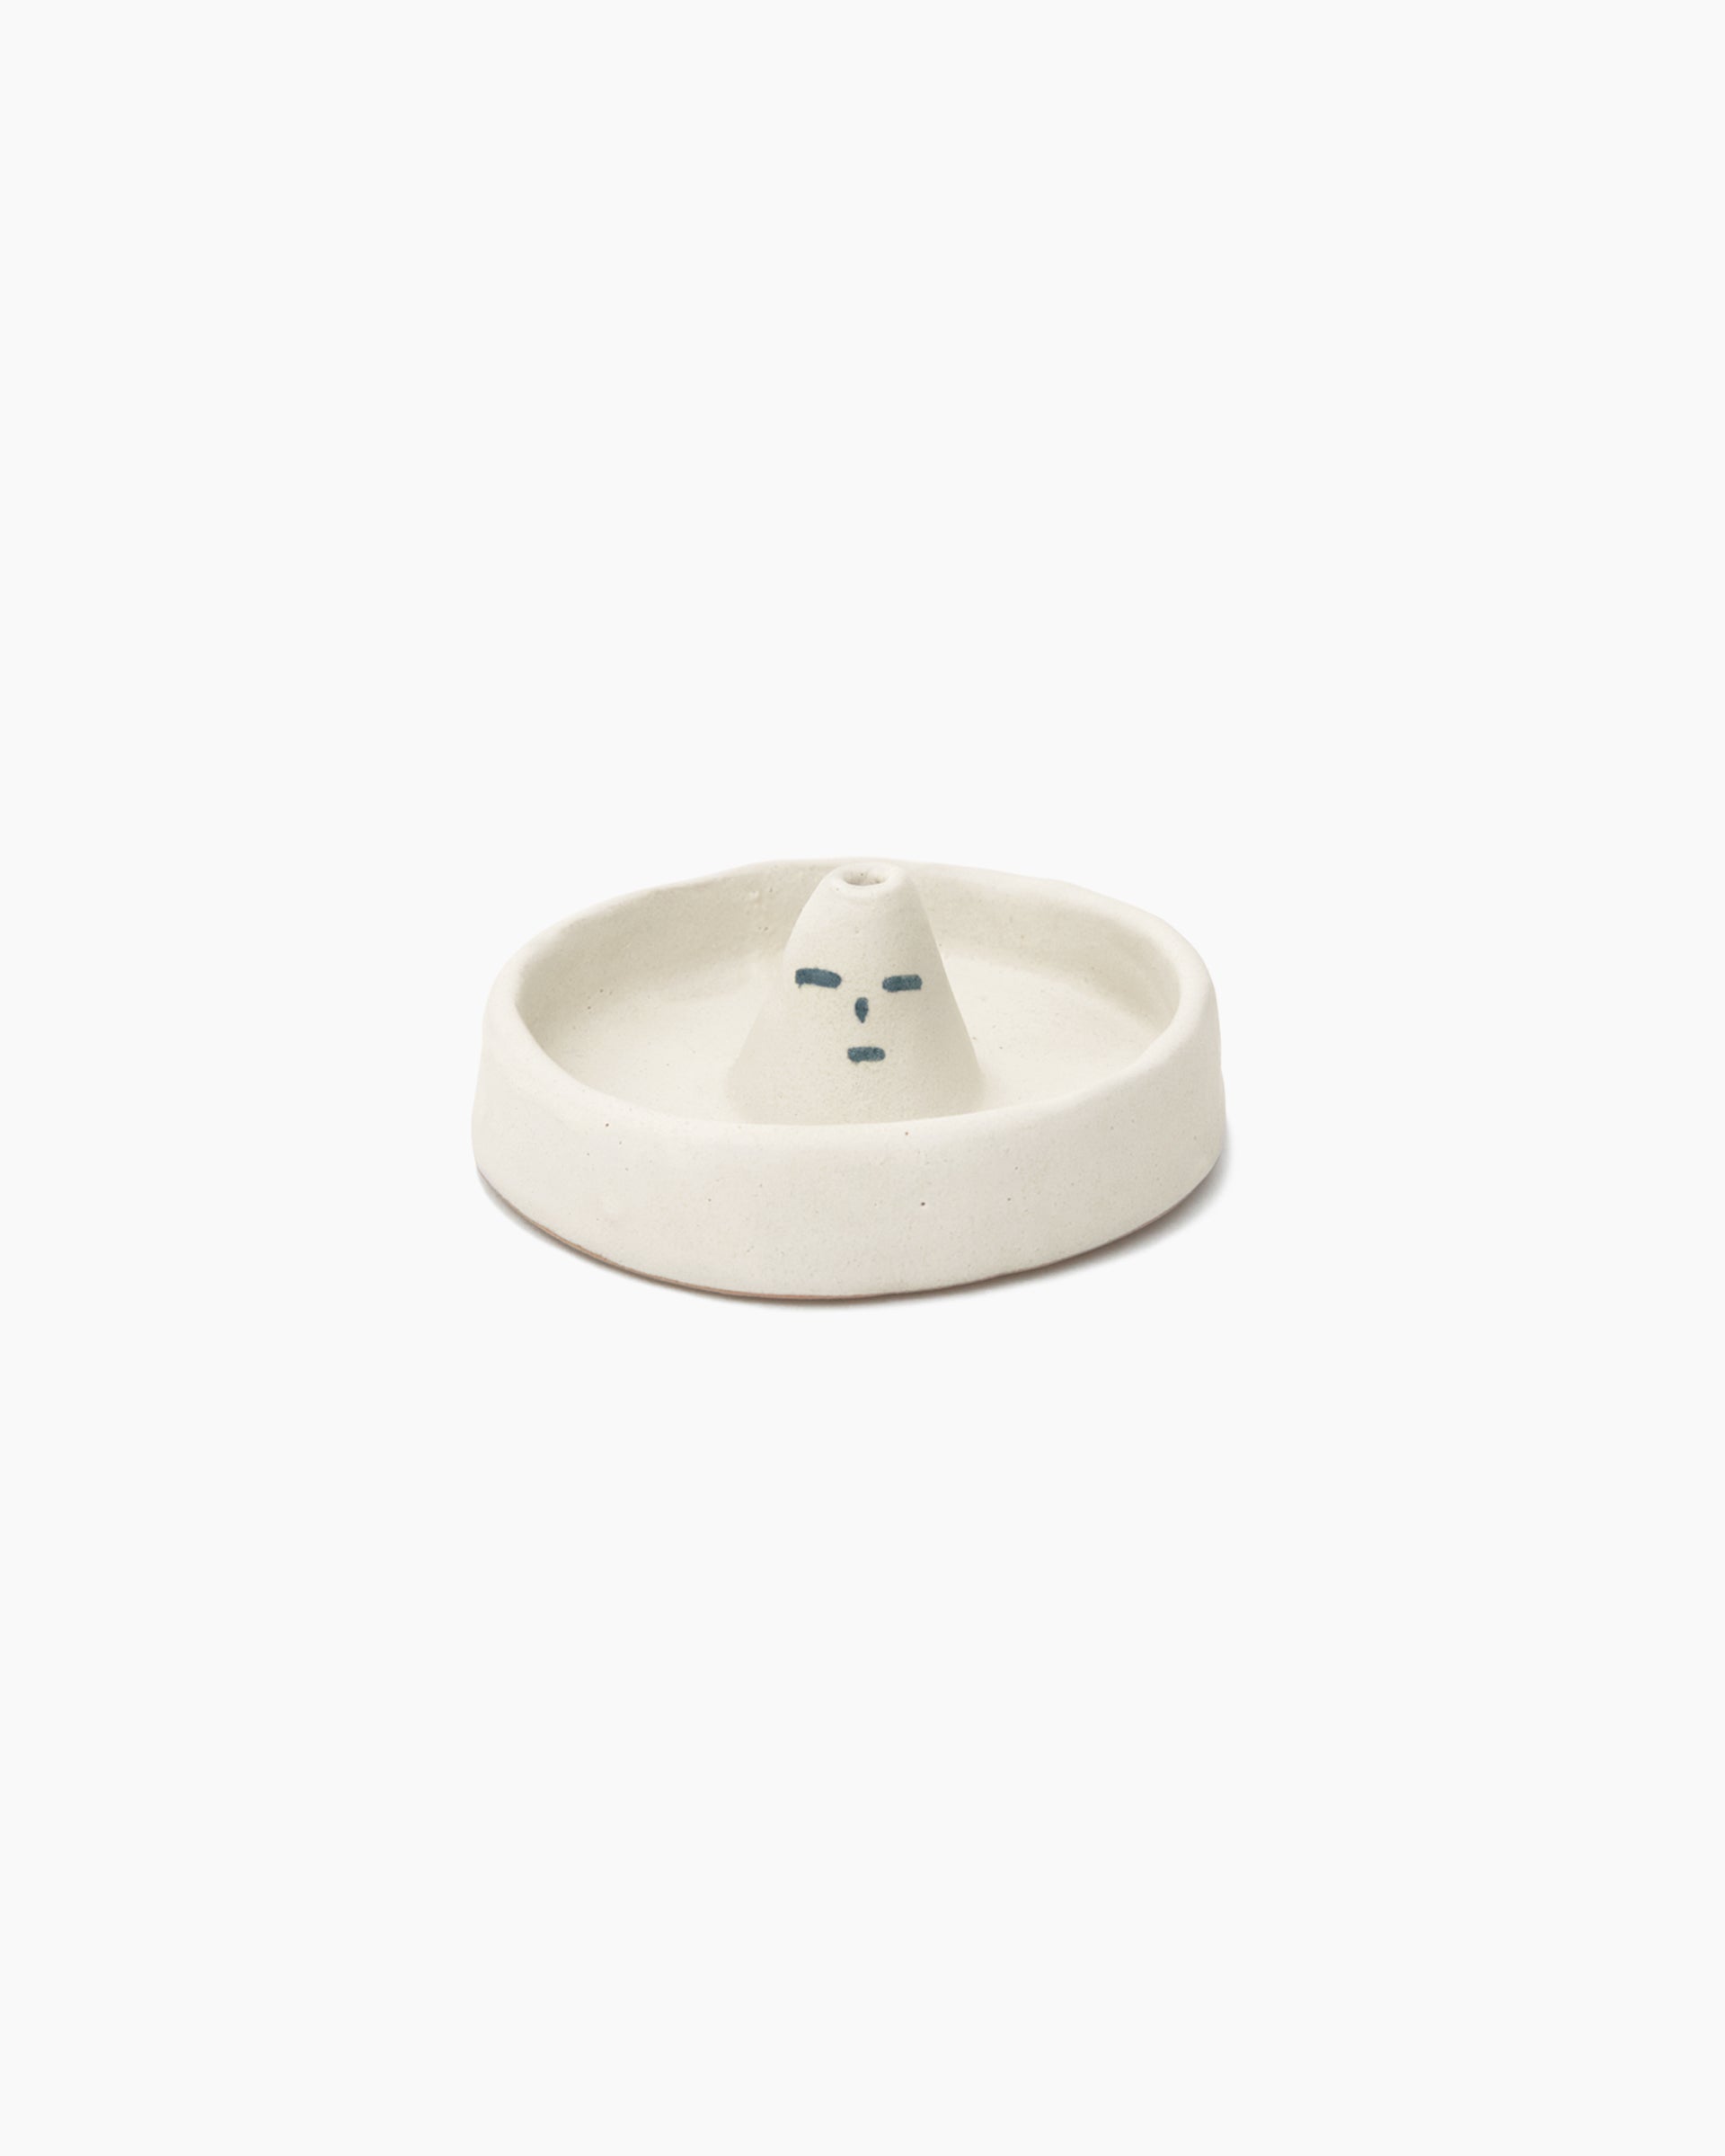 Conic Head Incense Holder With Saucer